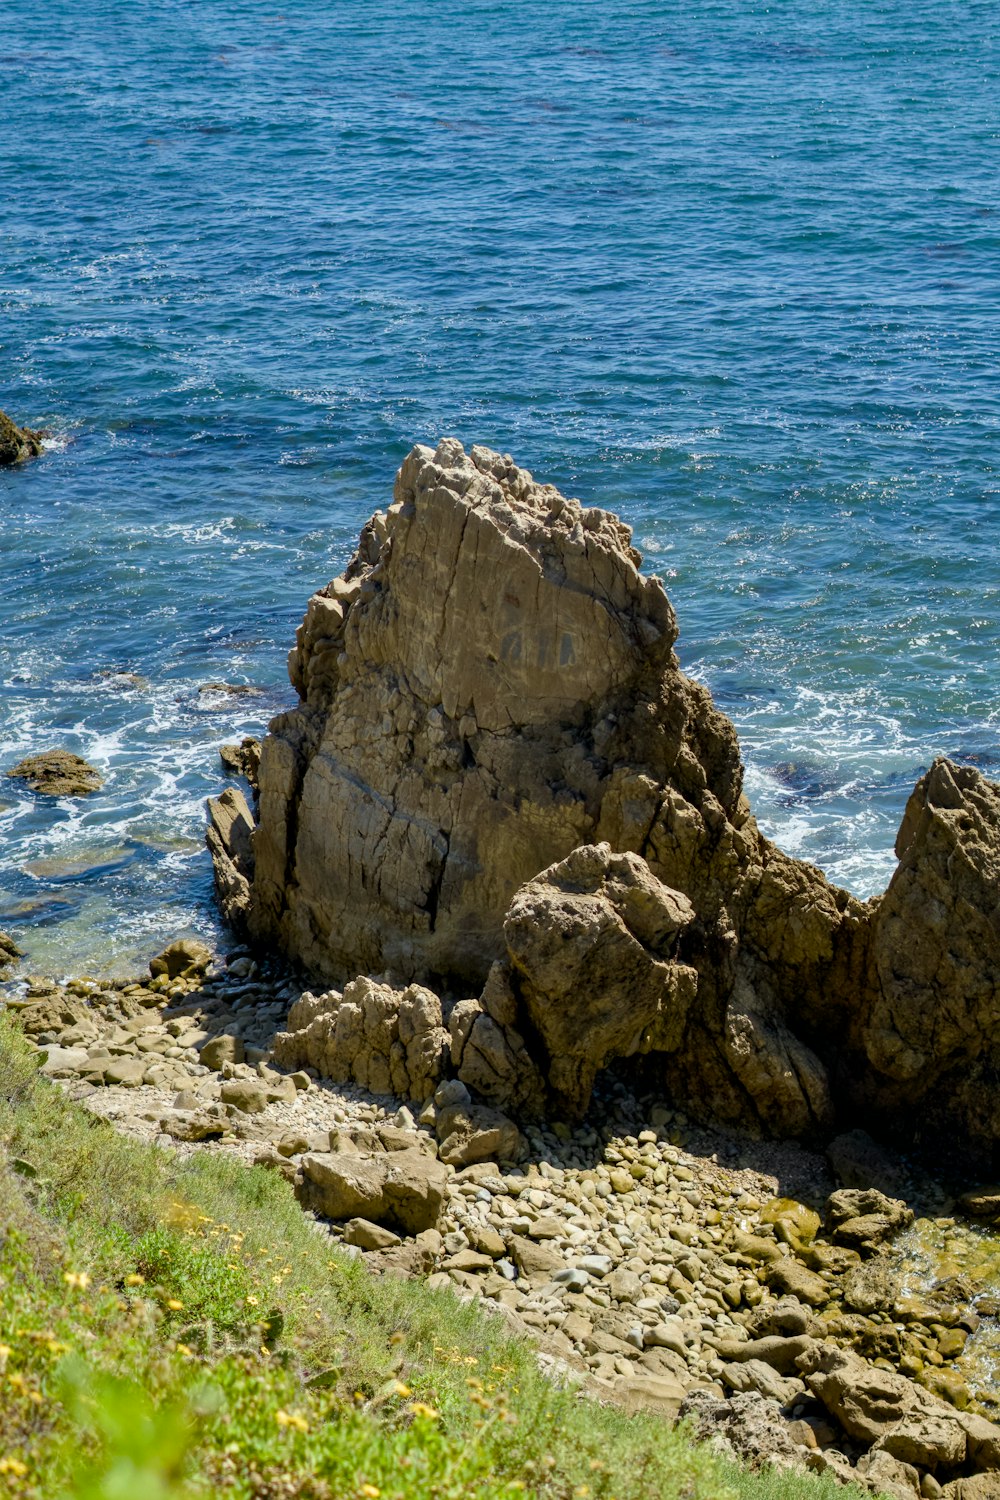 a large rock outcropping next to a body of water